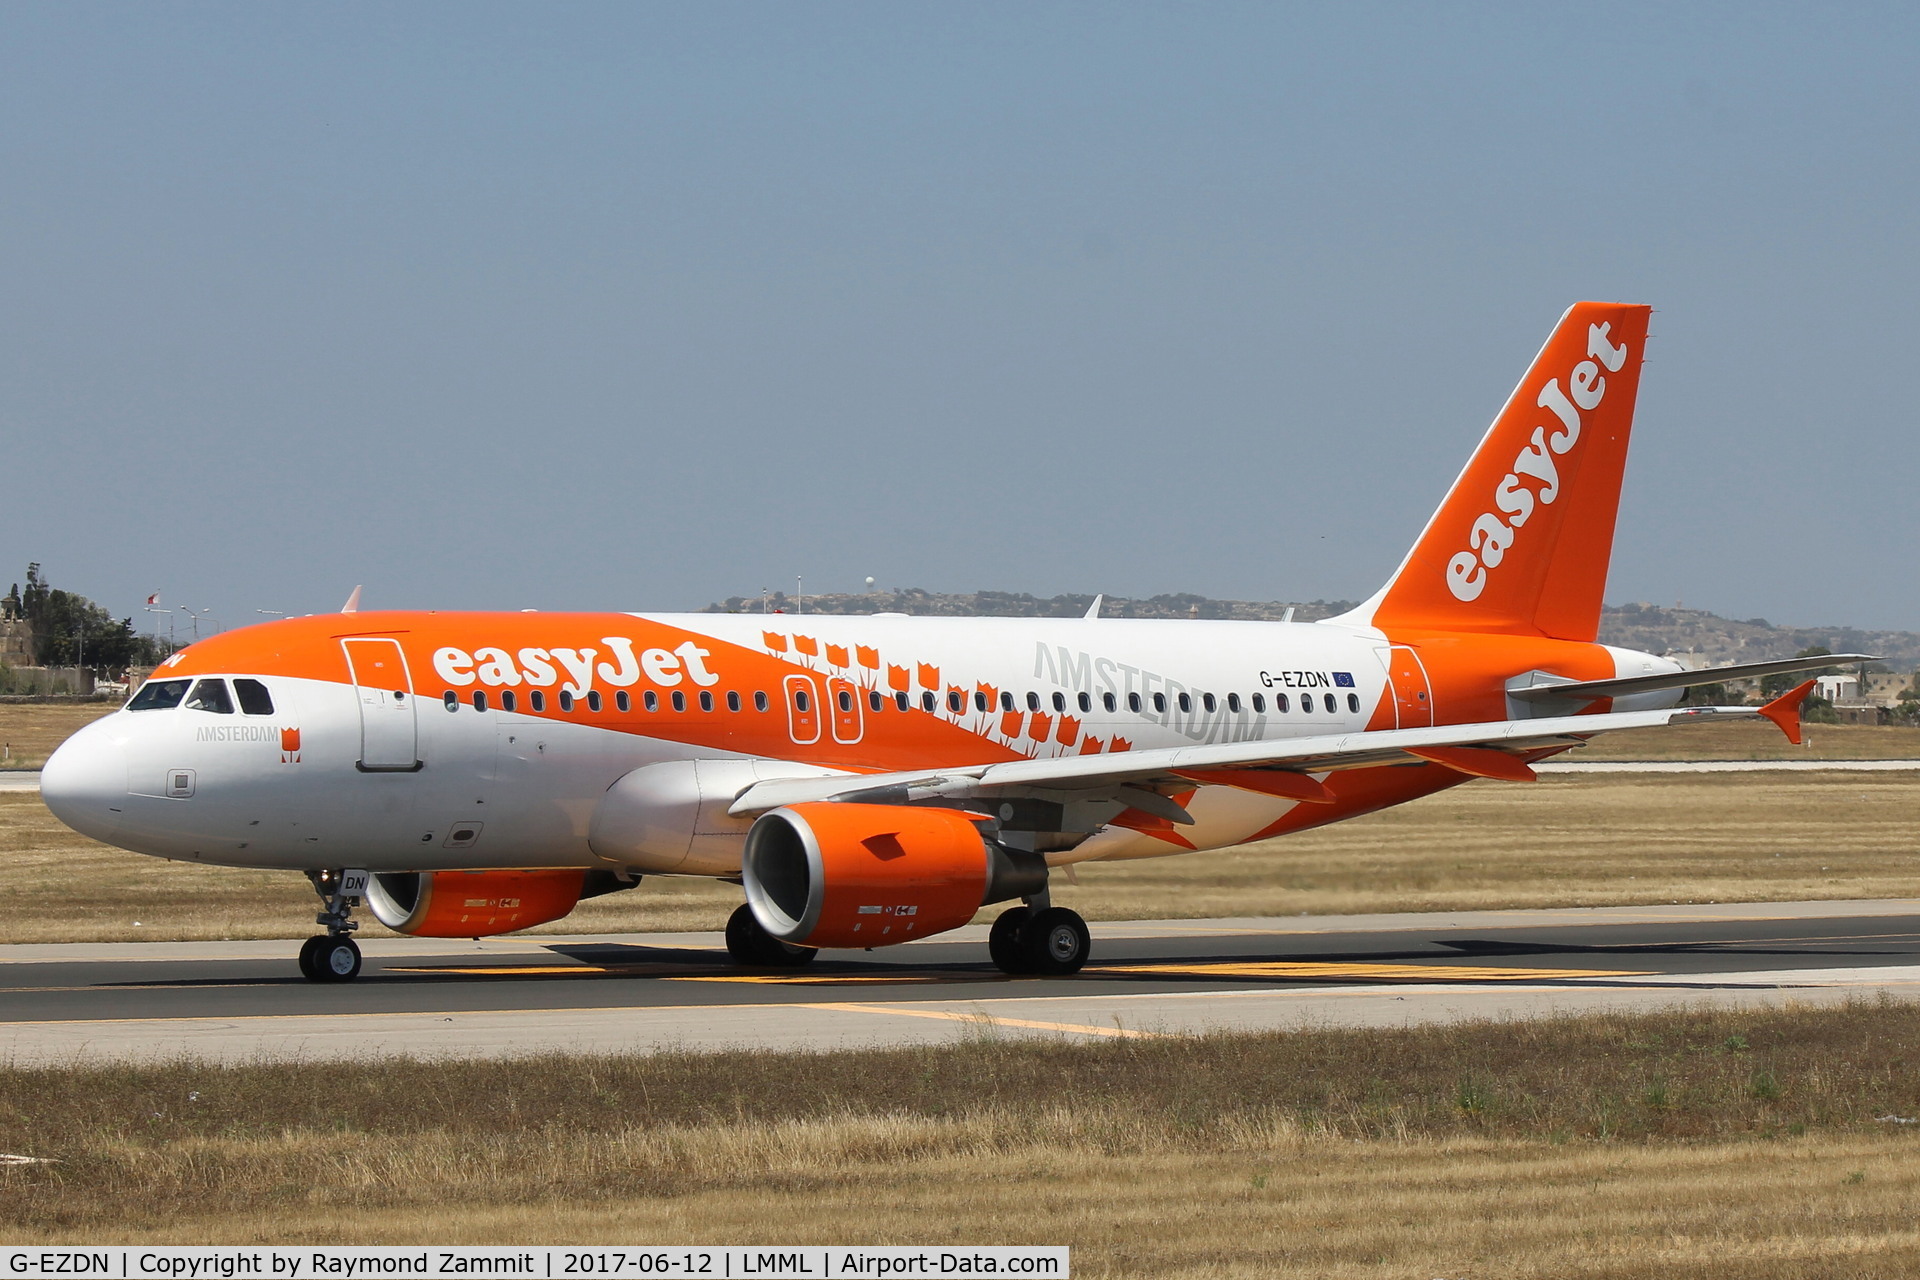 G-EZDN, 2008 Airbus A319-111 C/N 3569, A319 G-EZDN with special Amsterdam markings for Easyjet